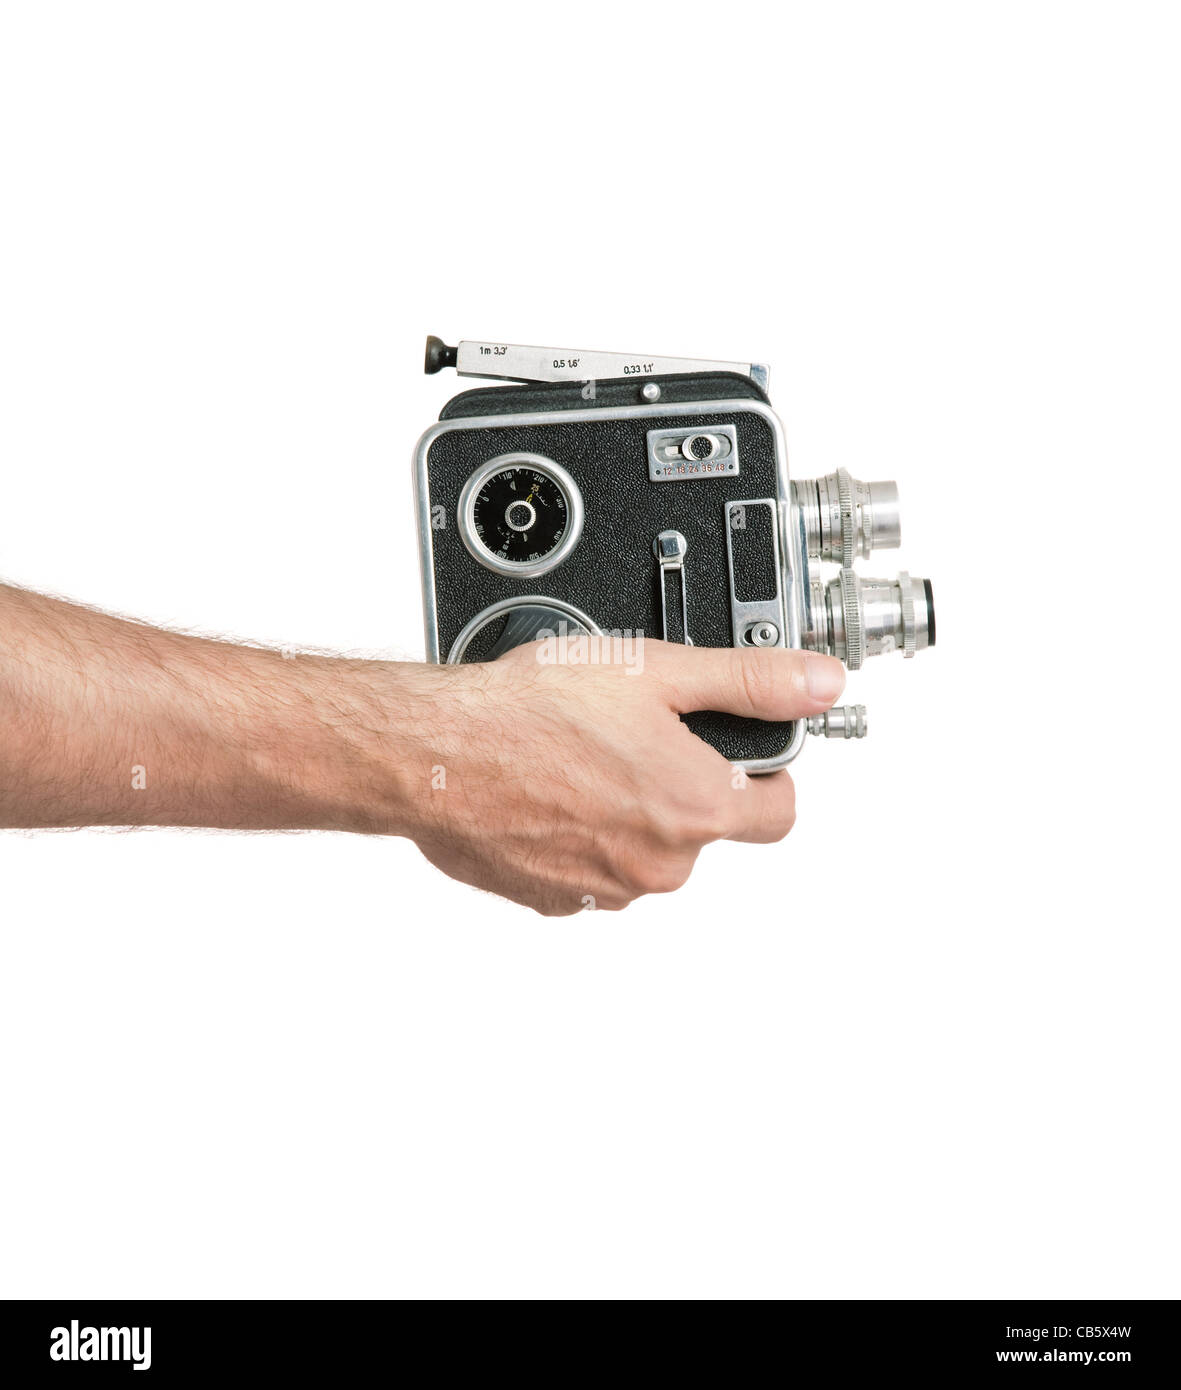 hand with cine-camera isolated on white background Stock Photo